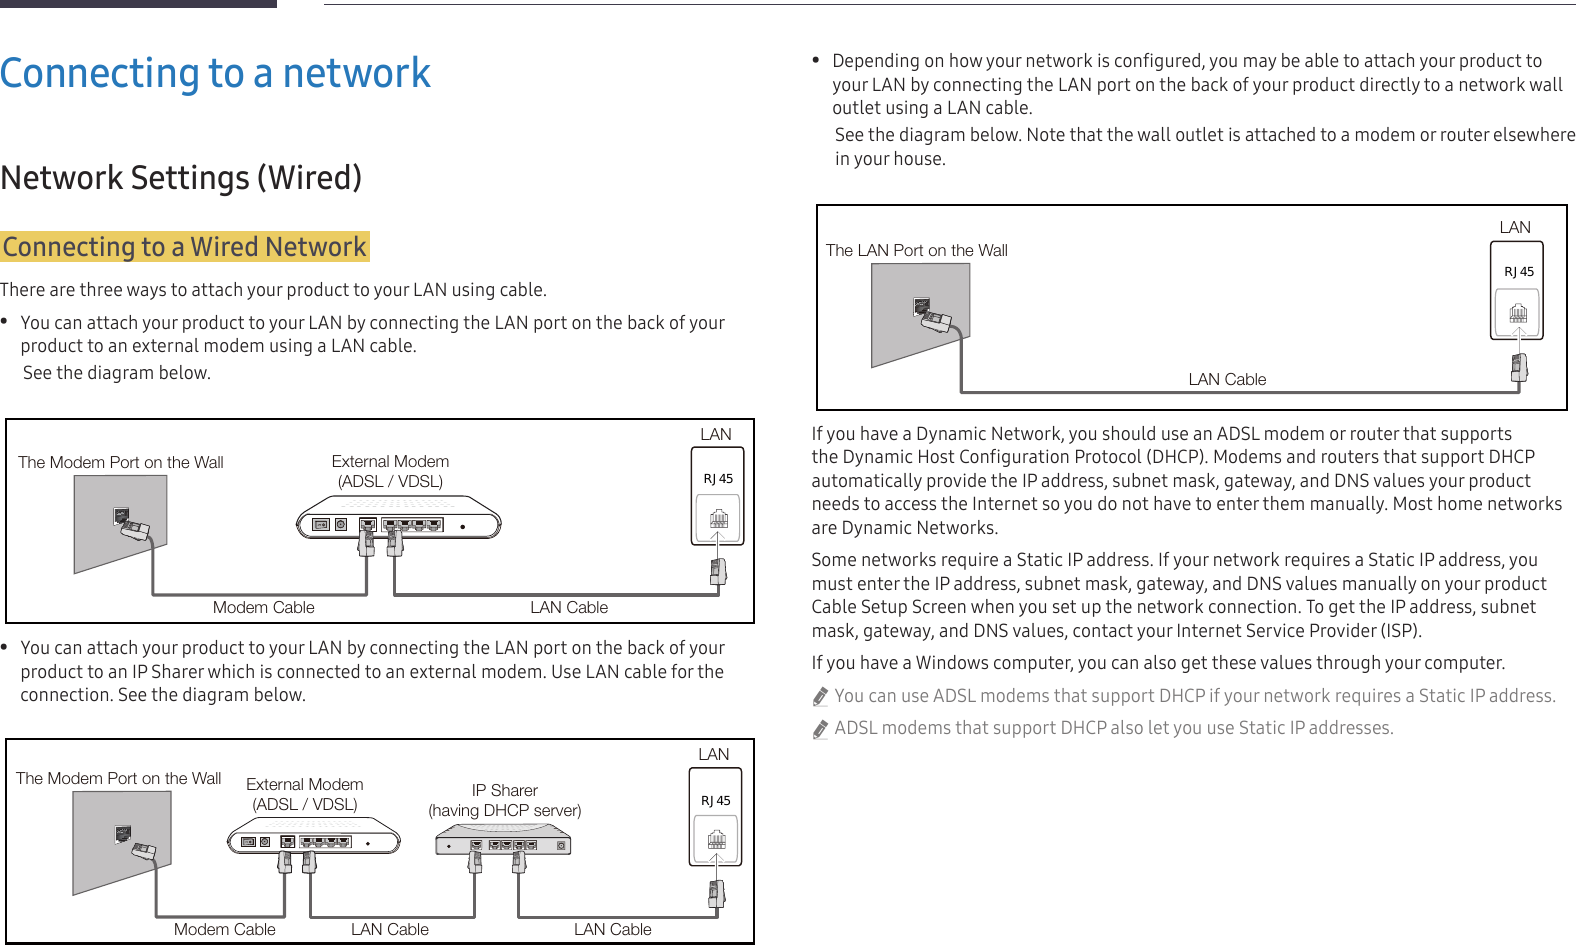 15Connecting to a networkNetwork Settings (Wired)Connecting to a Wired NetworkThere are three ways to attach your product to your LAN using cable. •You can attach your product to your LAN by connecting the LAN port on the back of your product to an external modem using a LAN cable.See the diagram below.RJ45The Modem Port on the Wall External Modem(ADSL / VDSL)Modem Cable LAN CableLAN •You can attach your product to your LAN by connecting the LAN port on the back of your product to an IP Sharer which is connected to an external modem. Use LAN cable for the connection. See the diagram below.The Modem Port on the Wall External Modem(ADSL / VDSL) IP Sharer(having DHCP server)LANModem Cable LAN Cable LAN CableRJ45 •Depending on how your network is configured, you may be able to attach your product to your LAN by connecting the LAN port on the back of your product directly to a network wall outlet using a LAN cable. See the diagram below. Note that the wall outlet is attached to a modem or router elsewhere in your house.The LAN Port on the WallLANLAN CableRJ45If you have a Dynamic Network, you should use an ADSL modem or router that supports the Dynamic Host Configuration Protocol (DHCP). Modems and routers that support DHCP automatically provide the IP address, subnet mask, gateway, and DNS values your product needs to access the Internet so you do not have to enter them manually. Most home networks are Dynamic Networks.Some networks require a Static IP address. If your network requires a Static IP address, you must enter the IP address, subnet mask, gateway, and DNS values manually on your product Cable Setup Screen when you set up the network connection. To get the IP address, subnet mask, gateway, and DNS values, contact your Internet Service Provider (ISP).If you have a Windows computer, you can also get these values through your computer. &quot;You can use ADSL modems that support DHCP if your network requires a Static IP address. &quot;ADSL modems that support DHCP also let you use Static IP addresses.